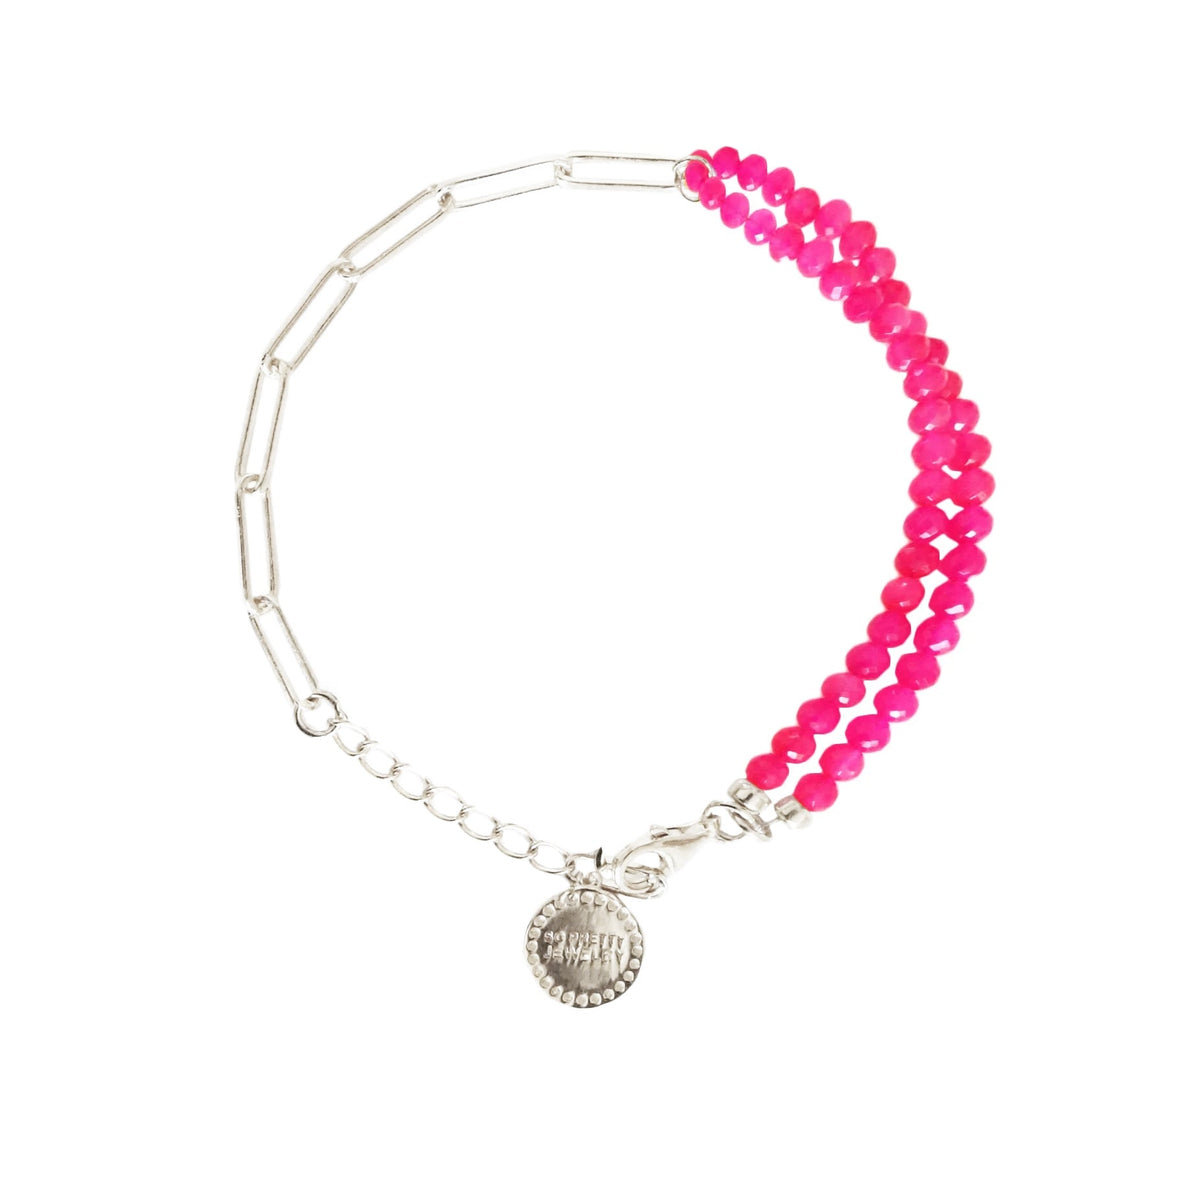 PRE-ORDER POISE BEADED LINK BRACELET - HOT PINK CHALCEDONY 7-8&quot; - SO PRETTY CARA COTTER